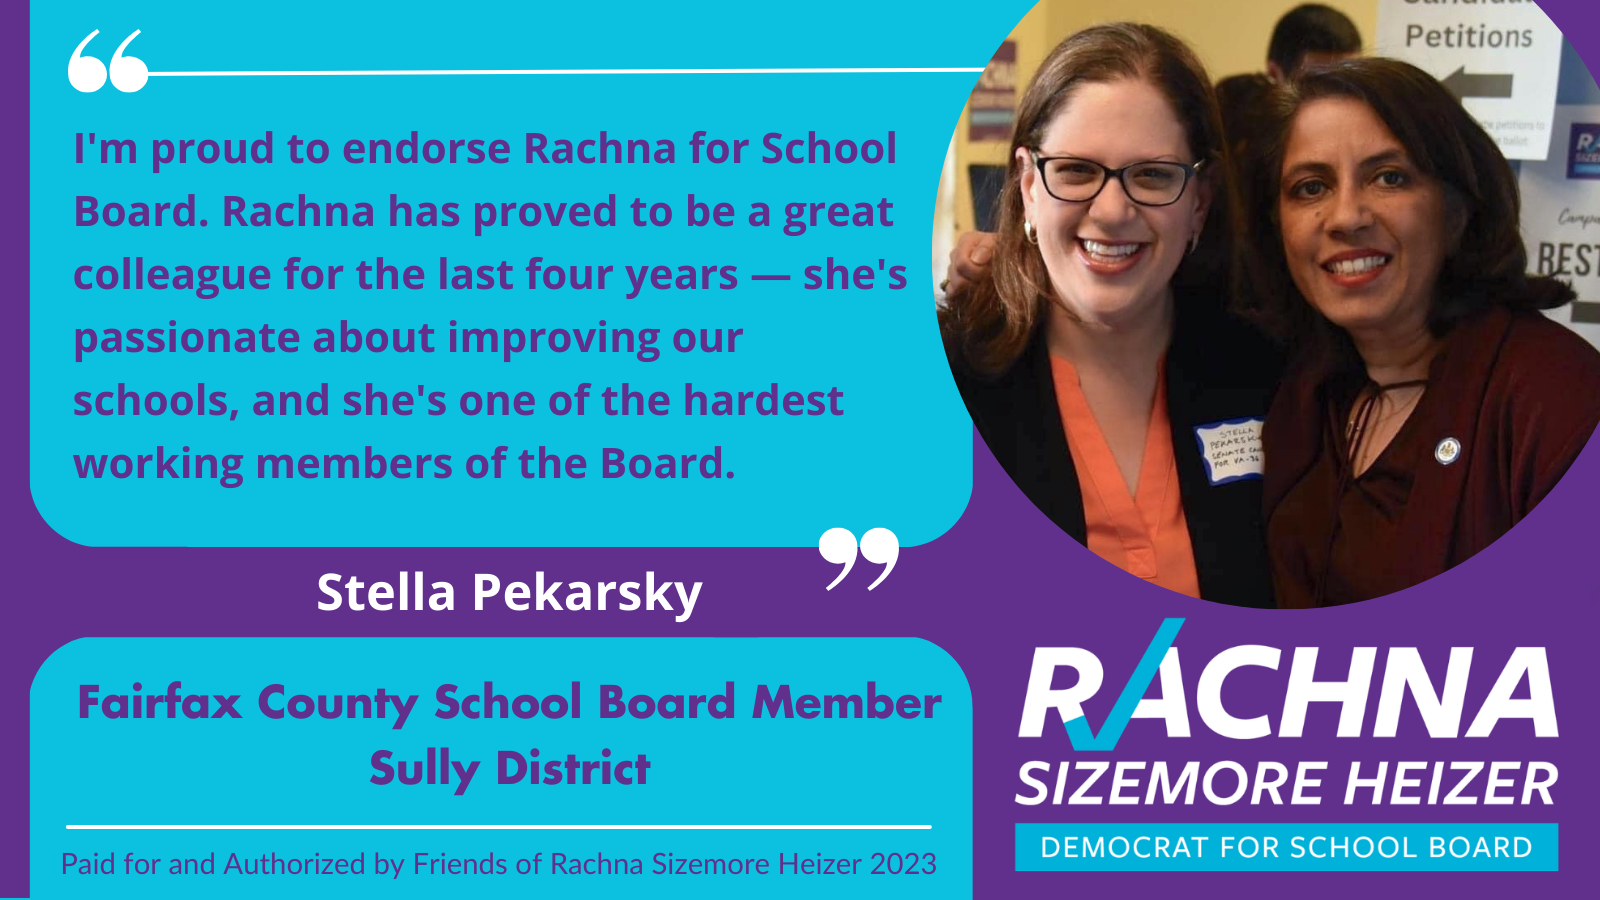  Endorsement from Fairfax County School Board Member Sully District Stella Pekarsky. Endorsement is “I’m proud to endorse Rachna for School Board. Rachna has proved to be a great colleague for the last four years — she’s passionate about improving ou